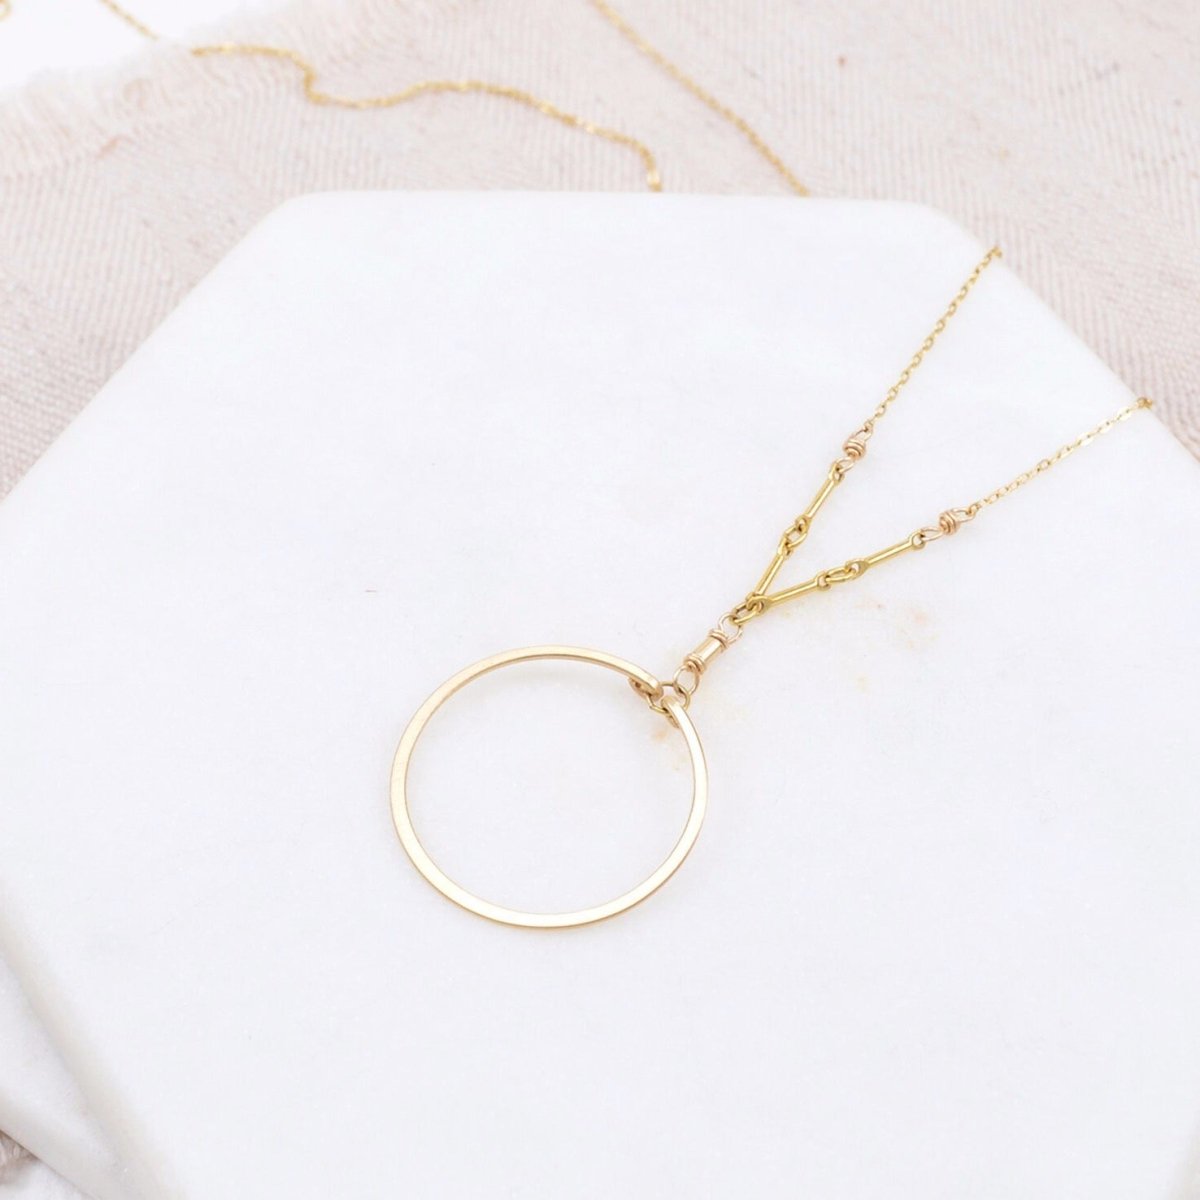 A single gold-fill hoop is suspended by a gold-fill links and chain. The Single Circle Necklace in Gold is designed and handmade by Amy Olson.